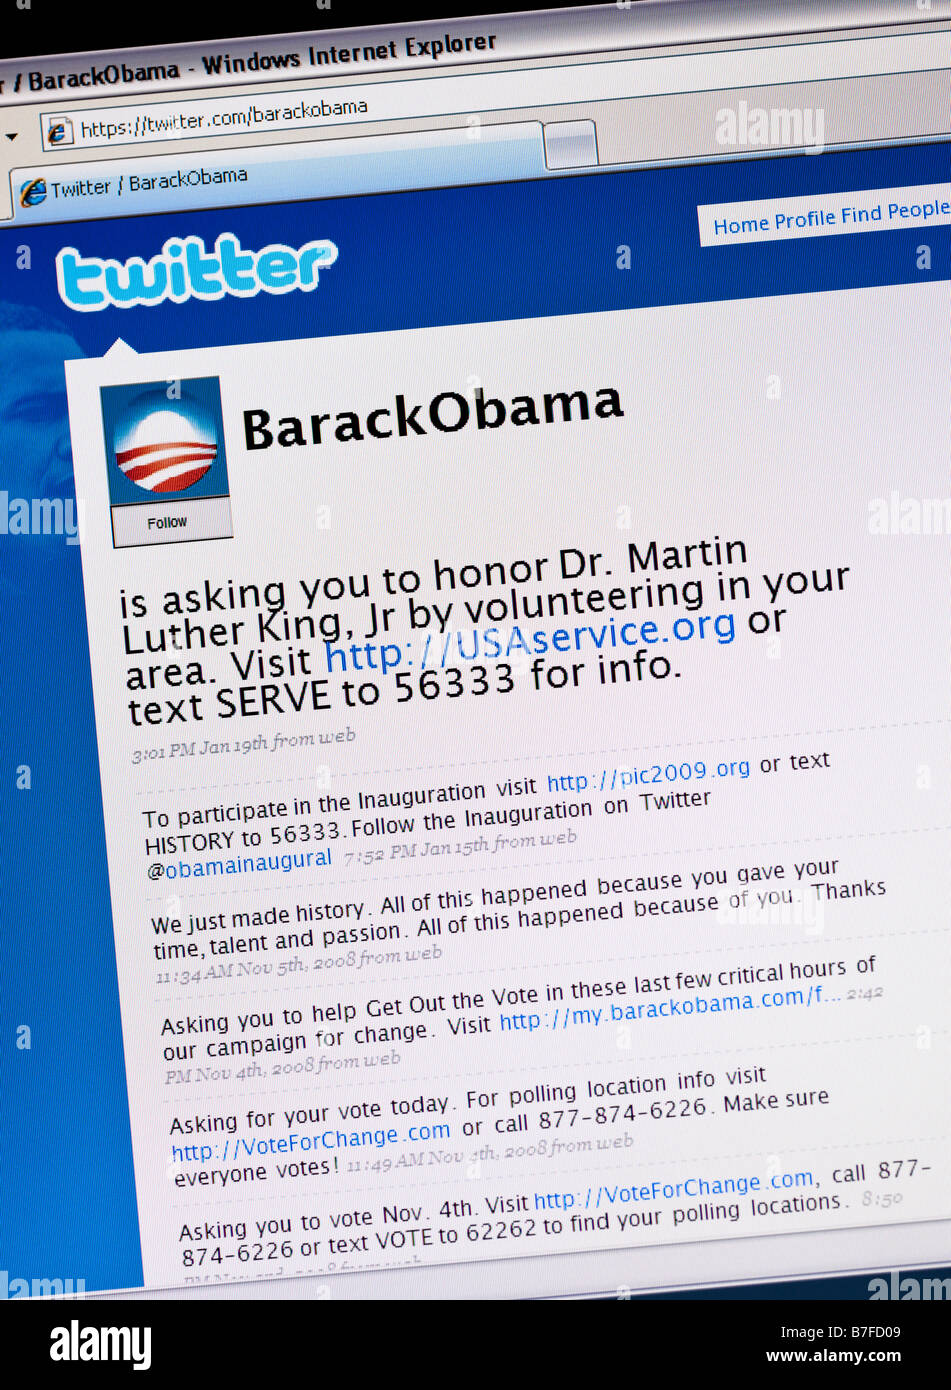 Twitter social networking site Barack Obama twitter page showing 'tweets' used for political campaigning during his run for President of the USA Stock Photo